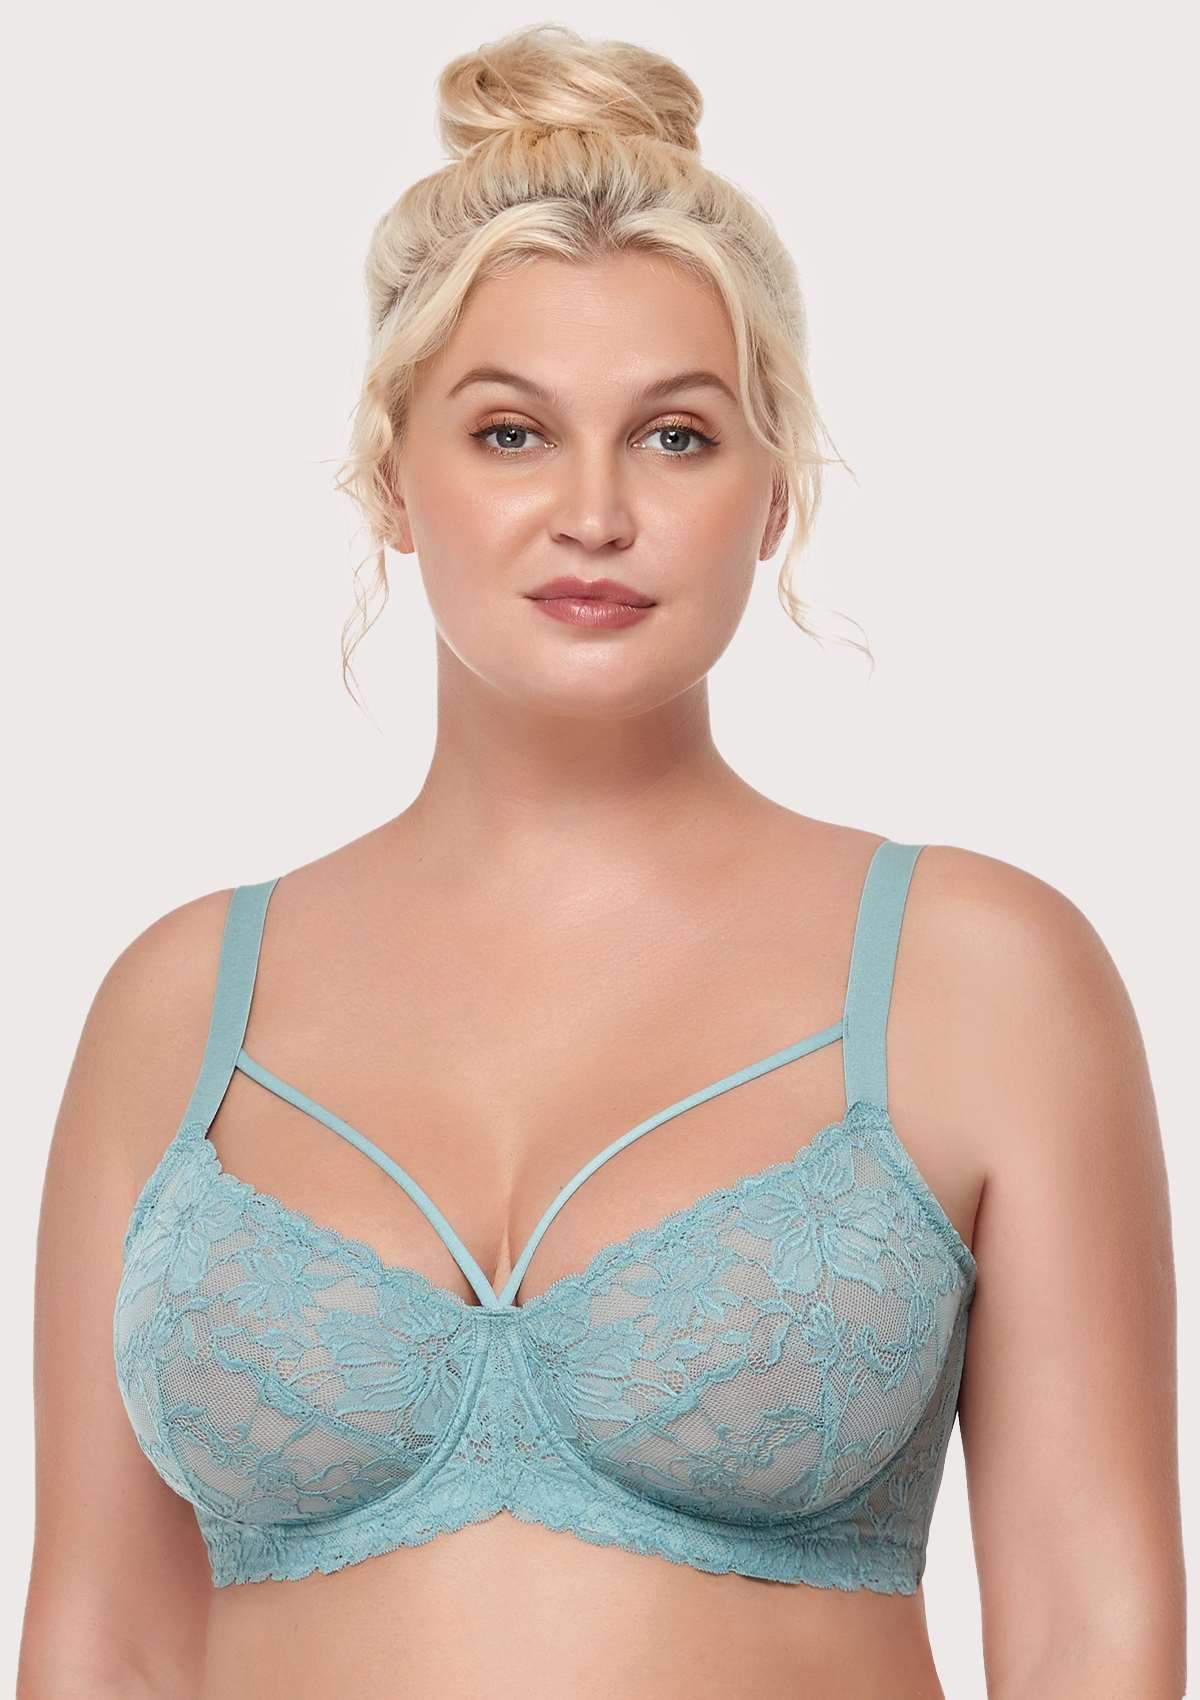 HSIA Pretty In Petals Unlined Lace Bra: Comfortable And Supportive Bra - Pewter Blue / 36 / DD/E